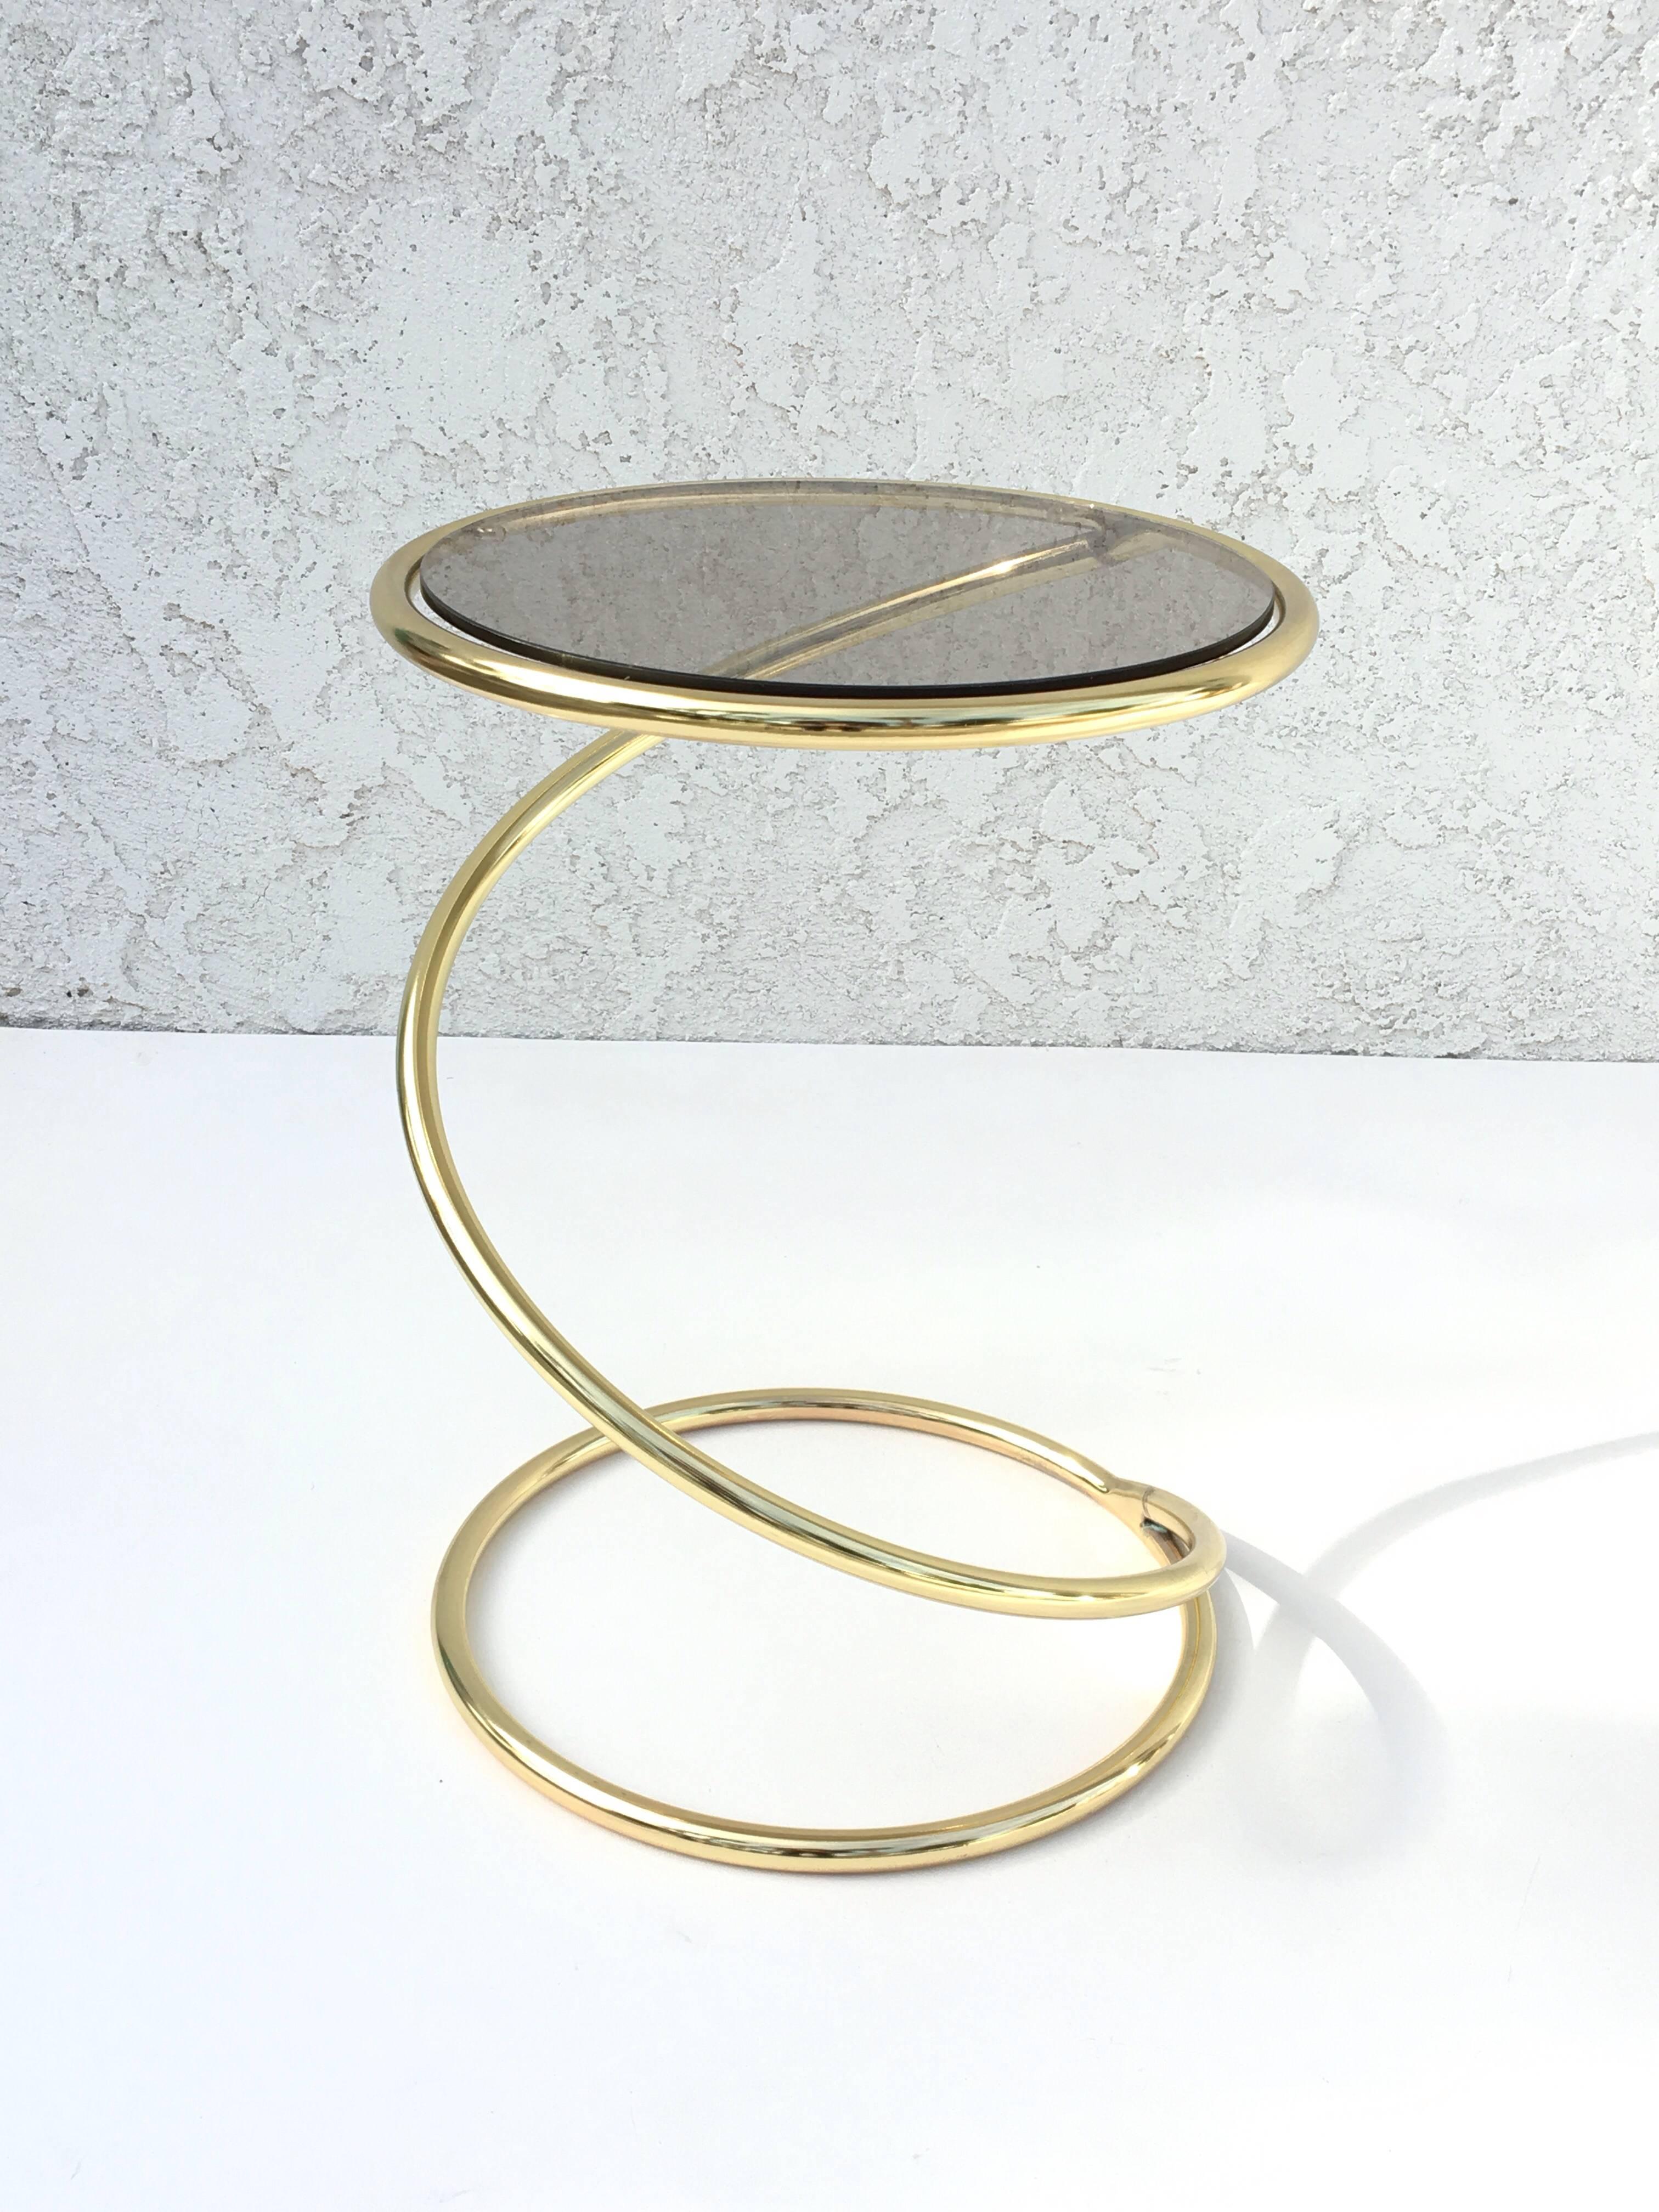 American Pair of Brass and Bronze Glass Spiral Occasional Tables by Pace Collection